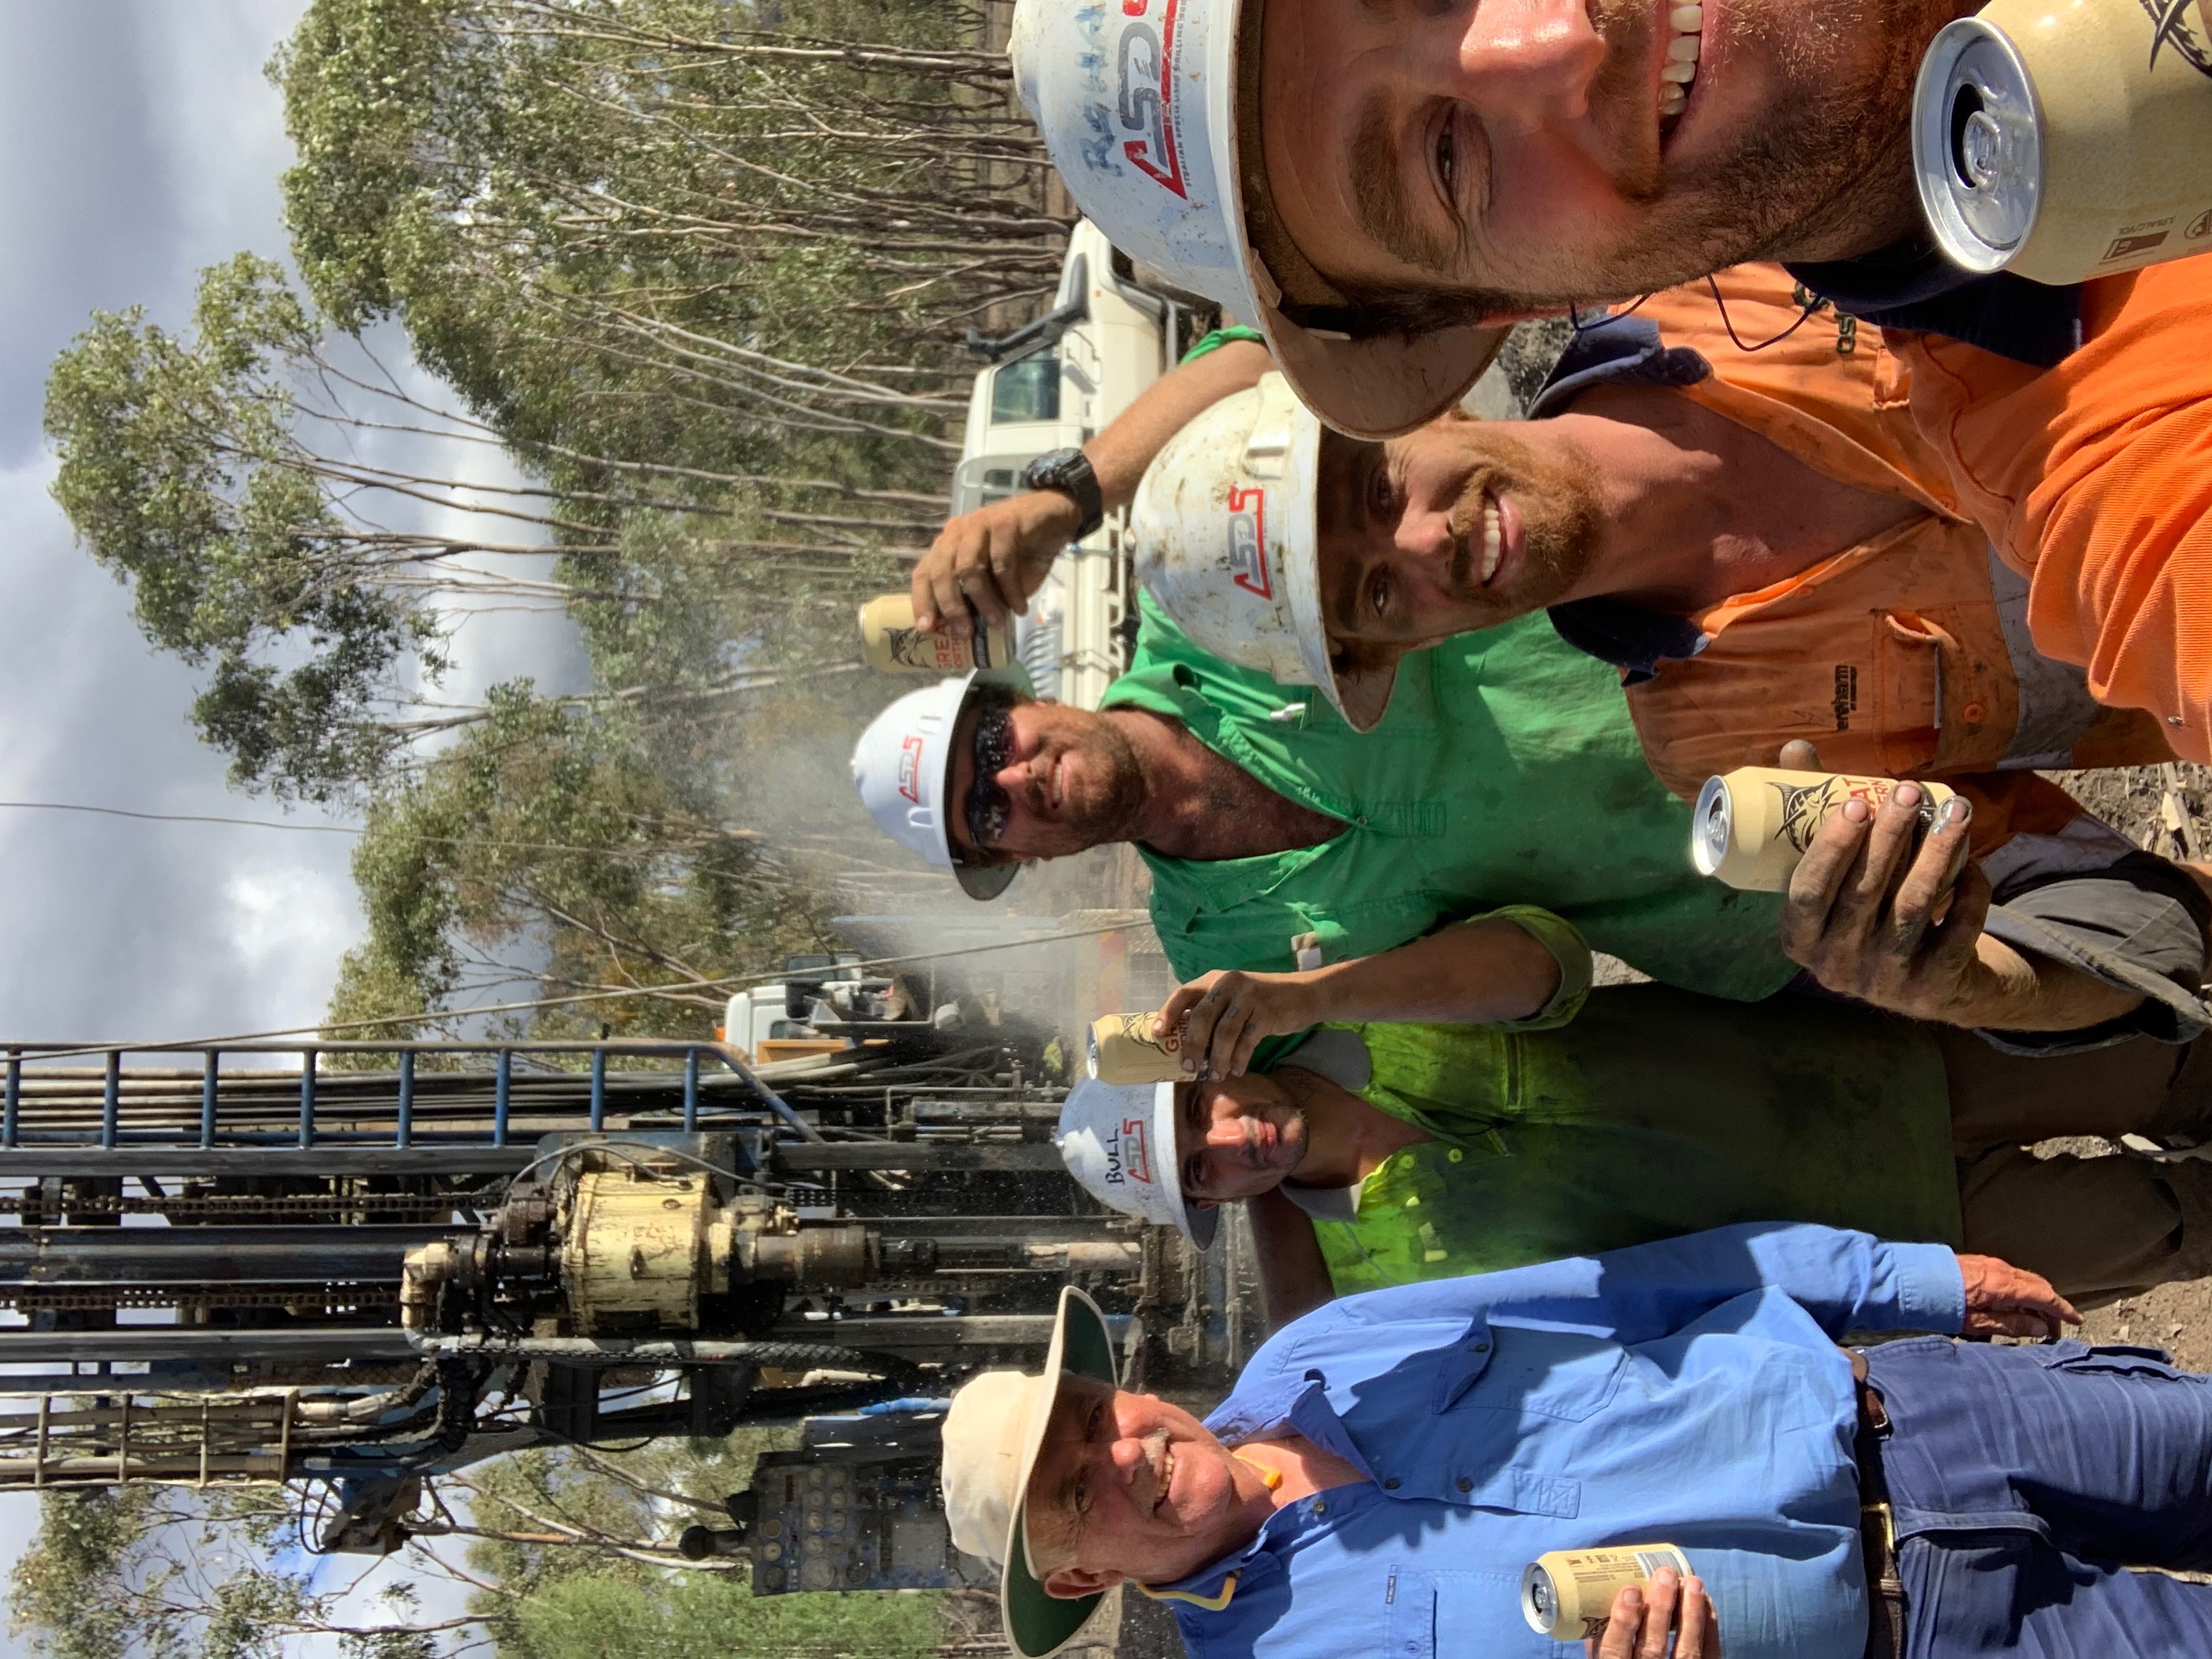 Farmer Angus Ferrier and drilling crew celebrate finding deep-seated water